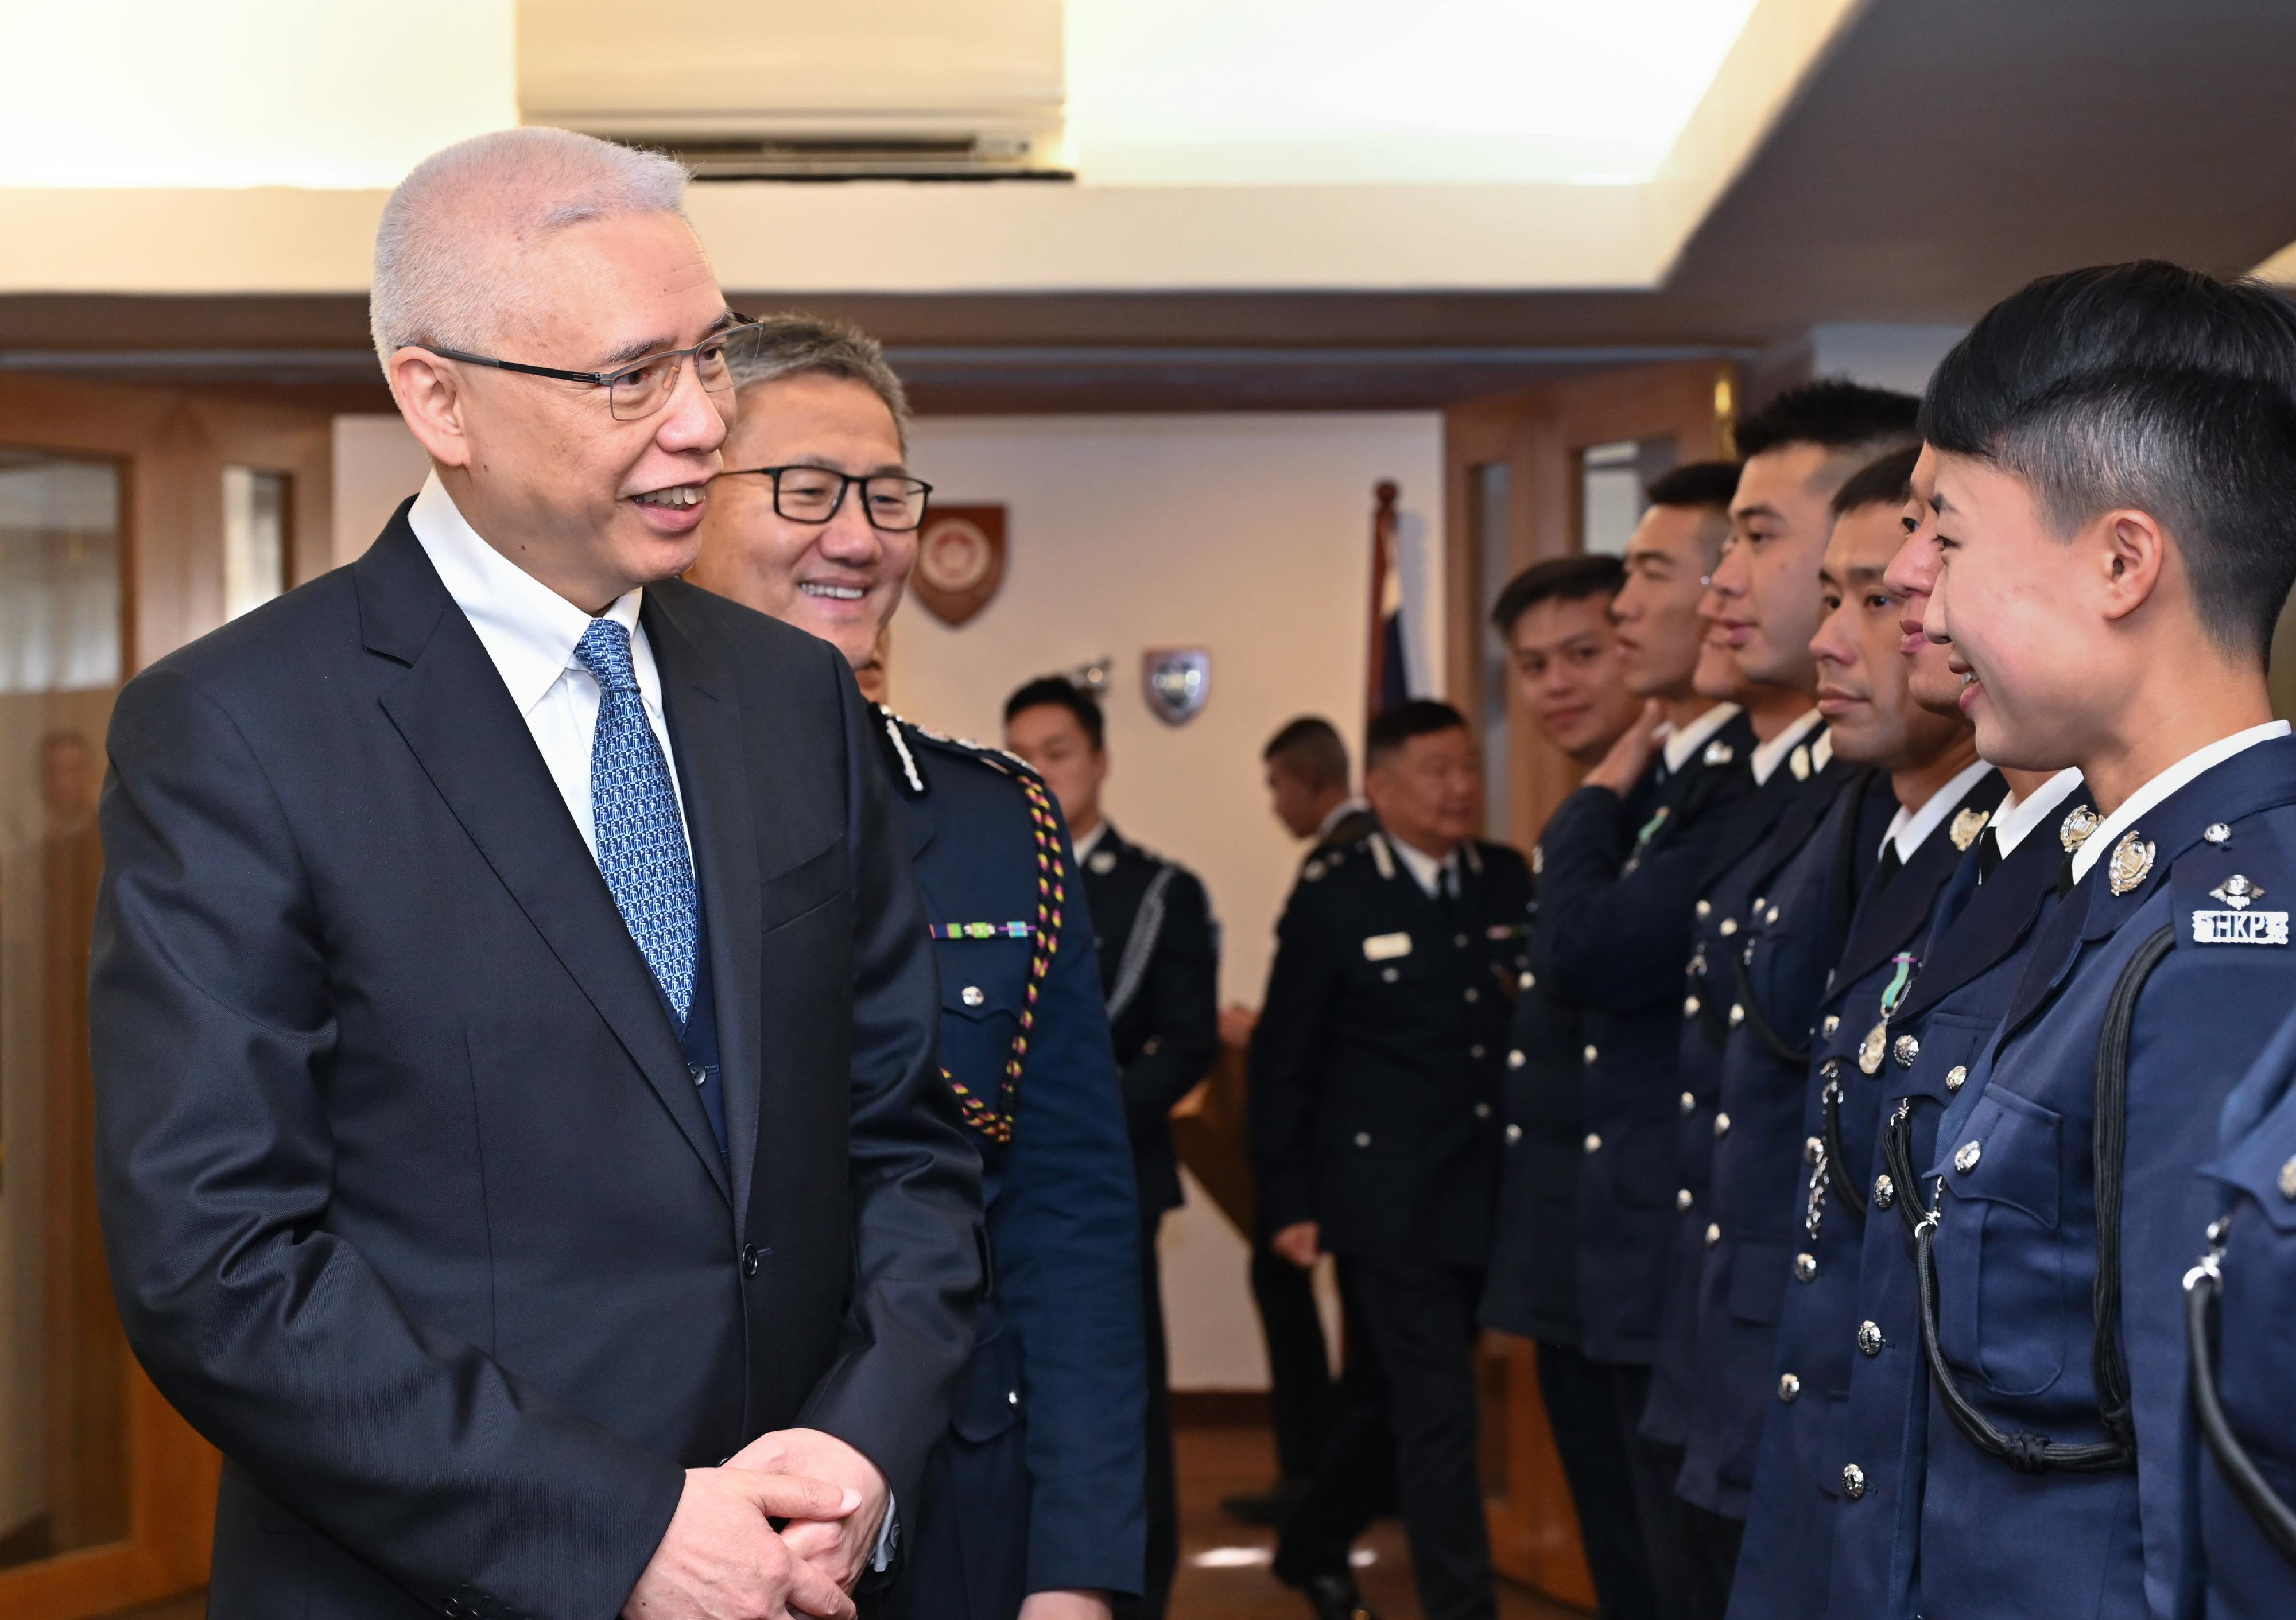 The Non-executive Chairman of MTR Corporation Limited, Dr Rex Auyeung Pak-kuen (first left), and the Commissioner of Police, Mr Siu Chak-yee (second left) congratulate the probationary inspectors after the passing-out parade held at the Hong Kong Police College today (February 3).